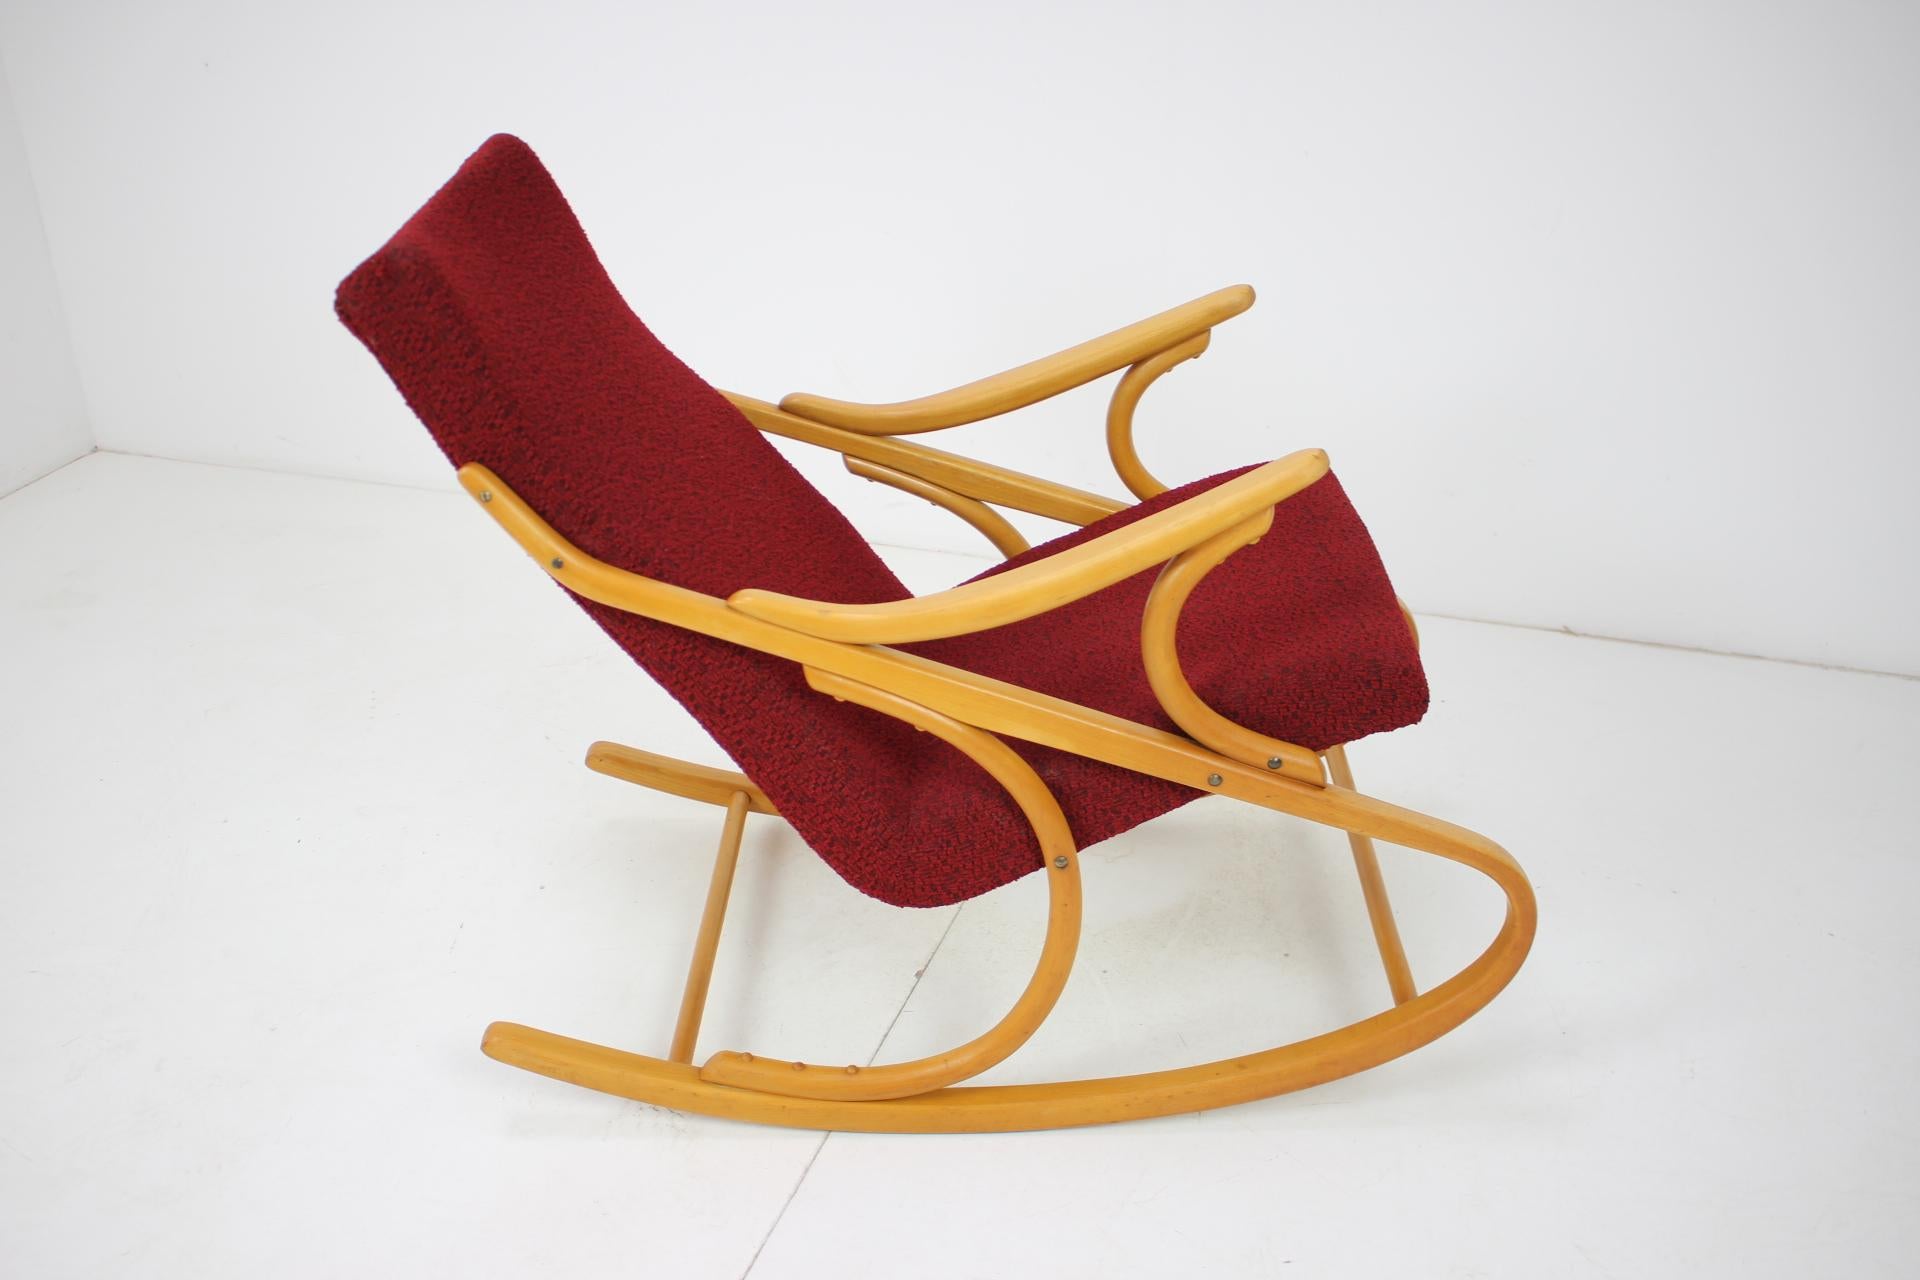 Czech Iconic Midcentury Design Rocking Chair / Expo, 1970 For Sale